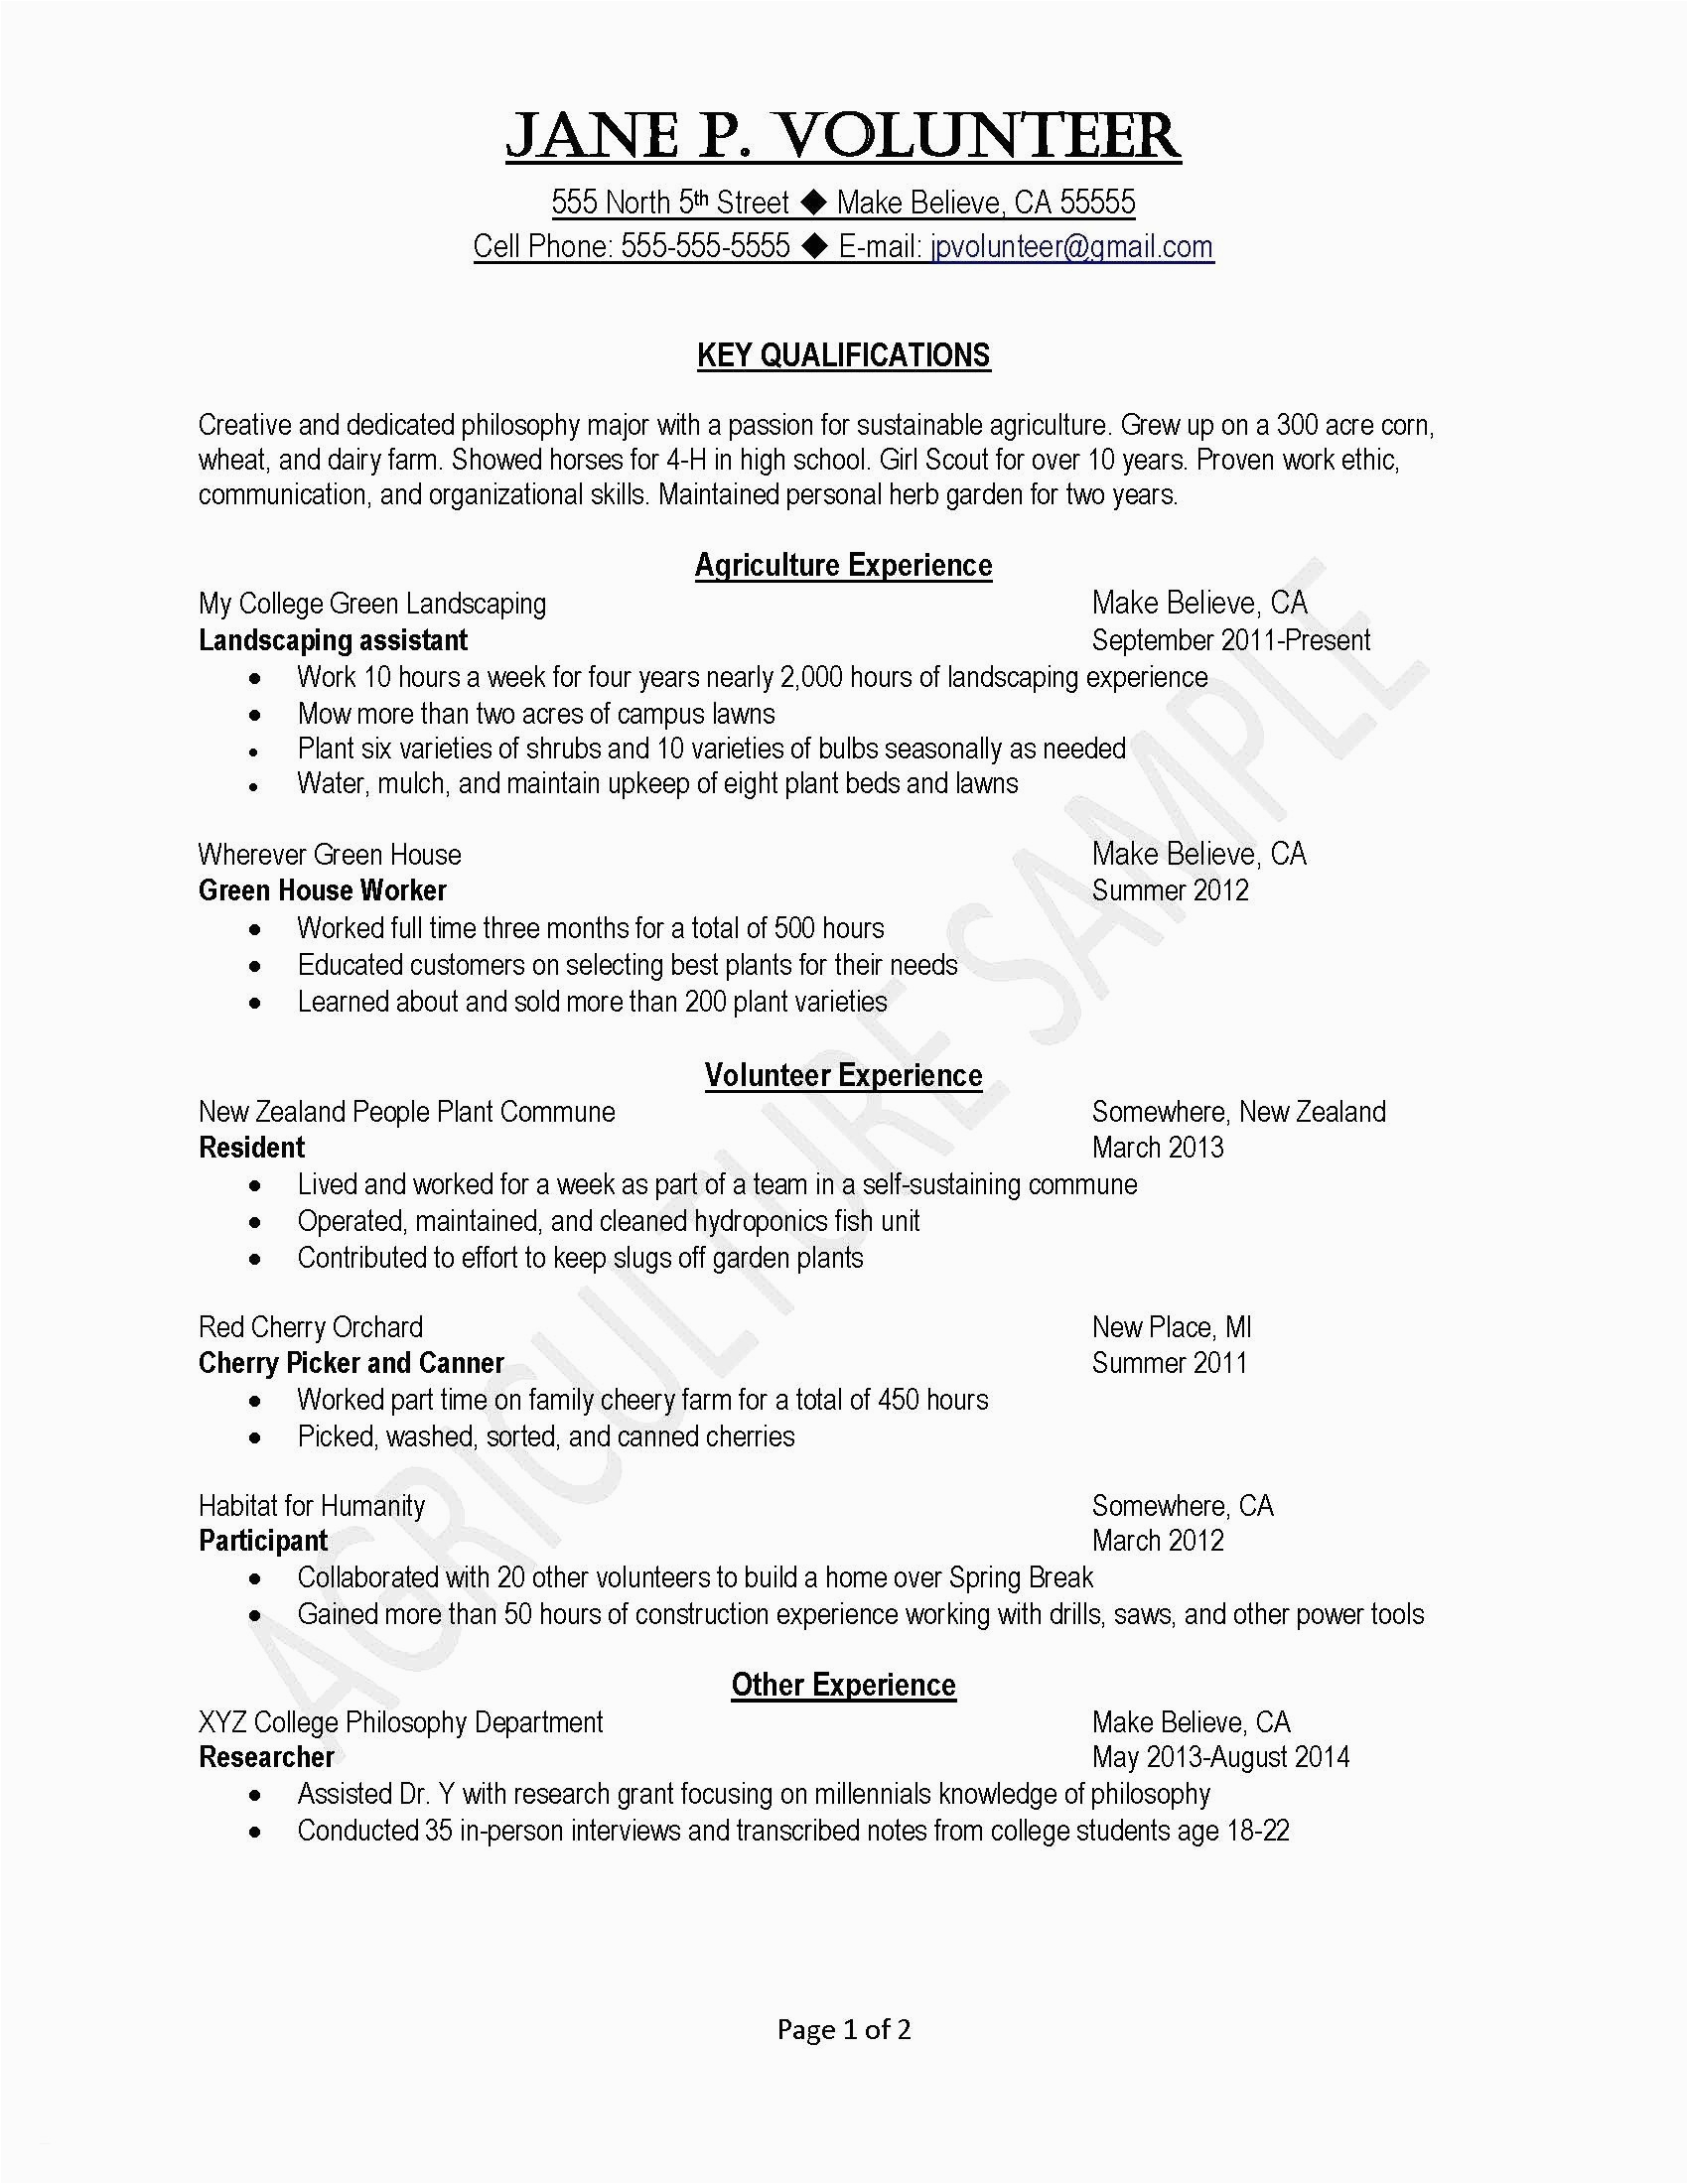 Sample Resume Objective Statements for High School Students Job Resume Samples for High School Students